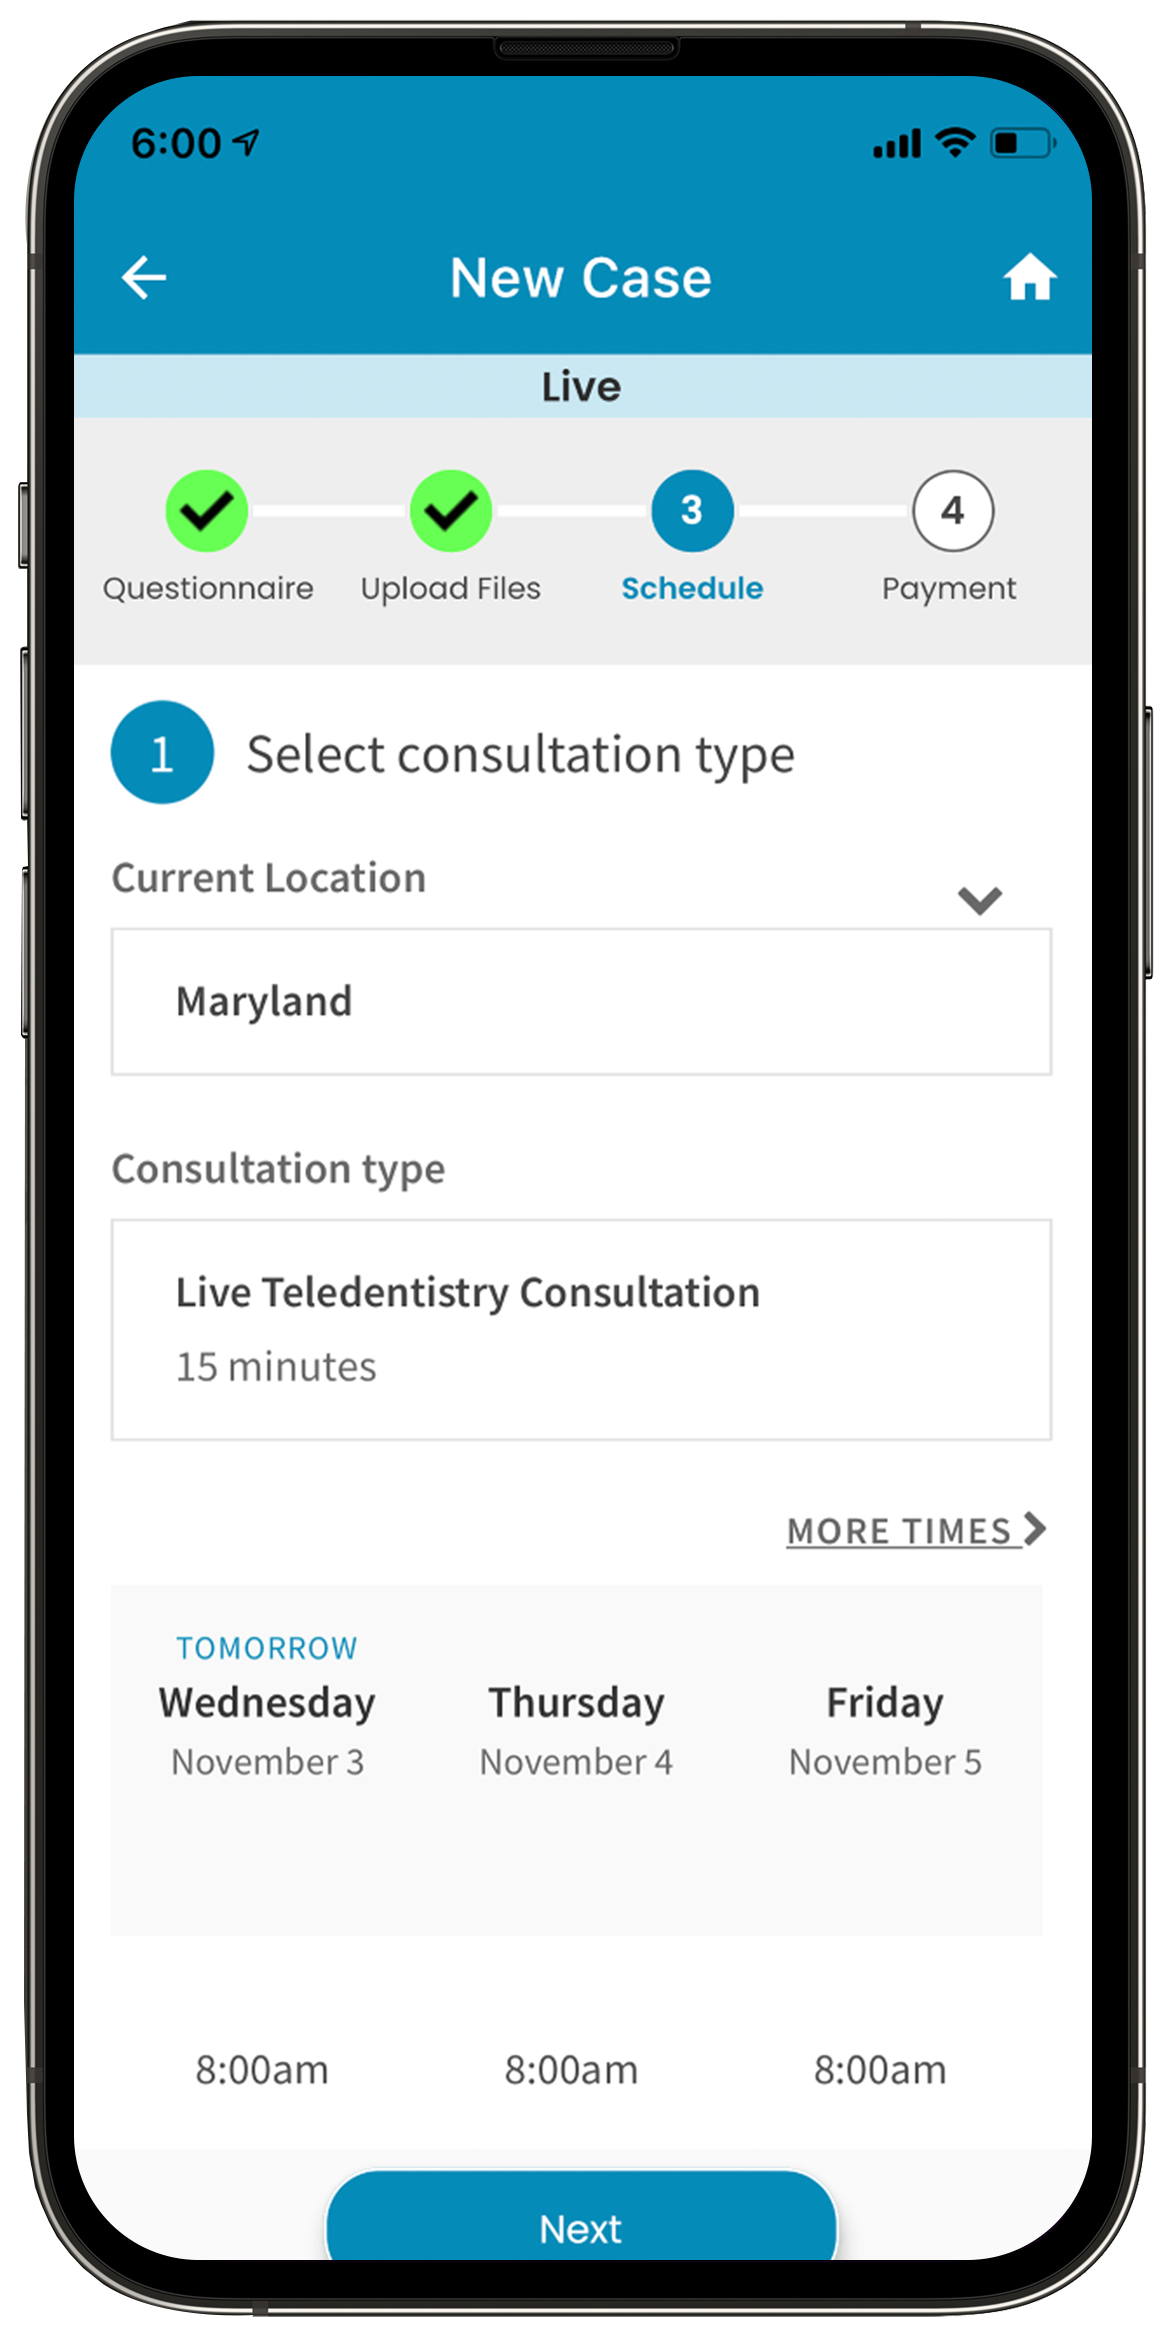 DigiBite teledentistry app scheduling a live teledentistry consultation screen